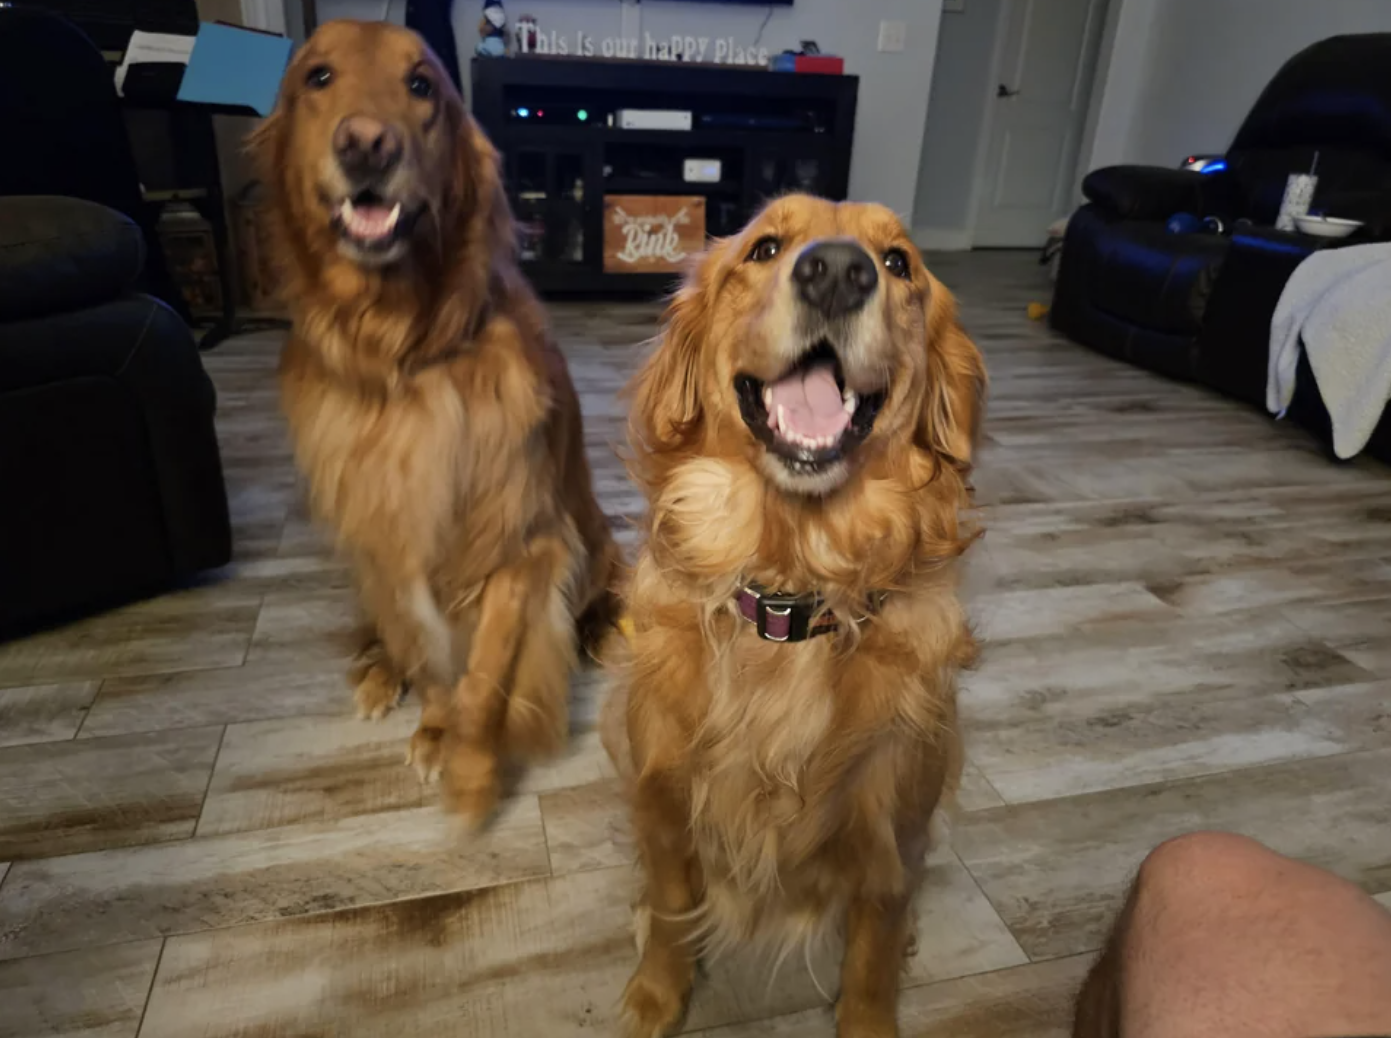 Two golden retrievers are being good boys